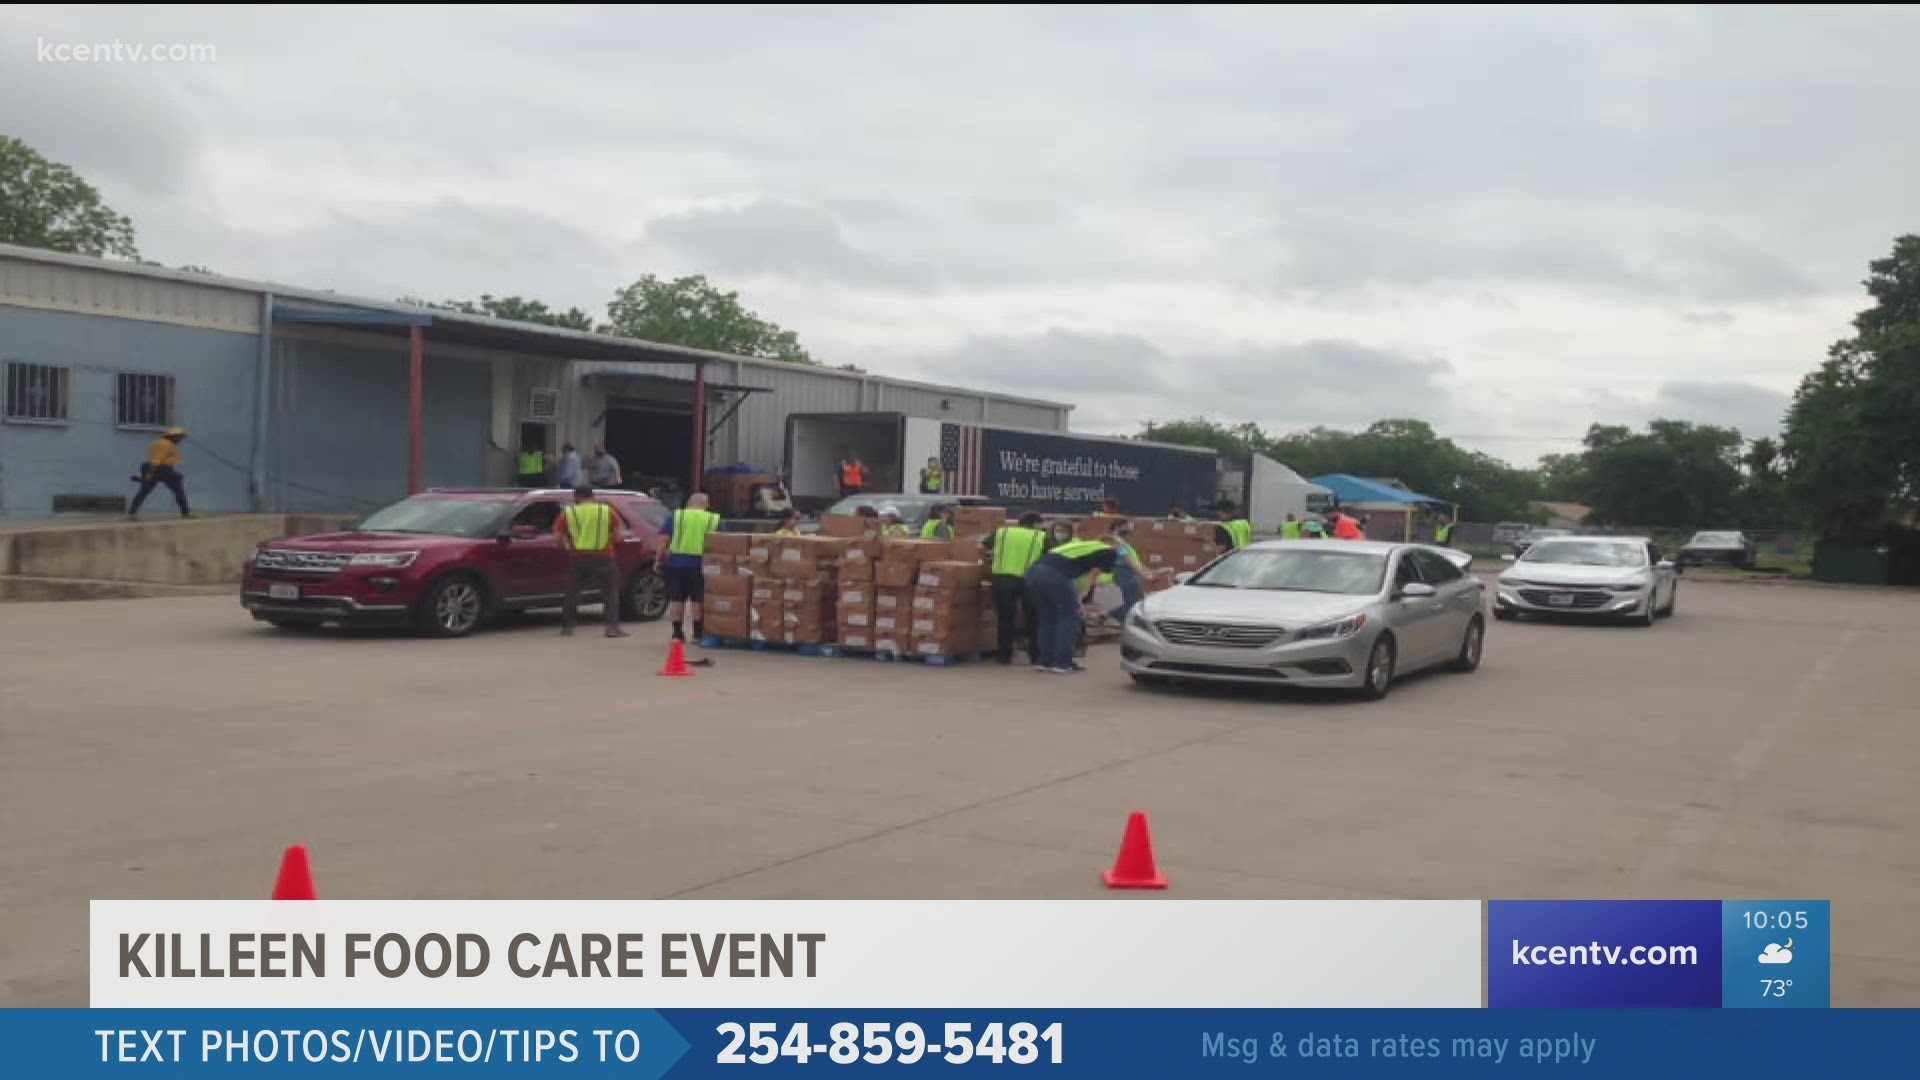 The food center distributed over 50,000 pounds of groceries during this drive-thru event.